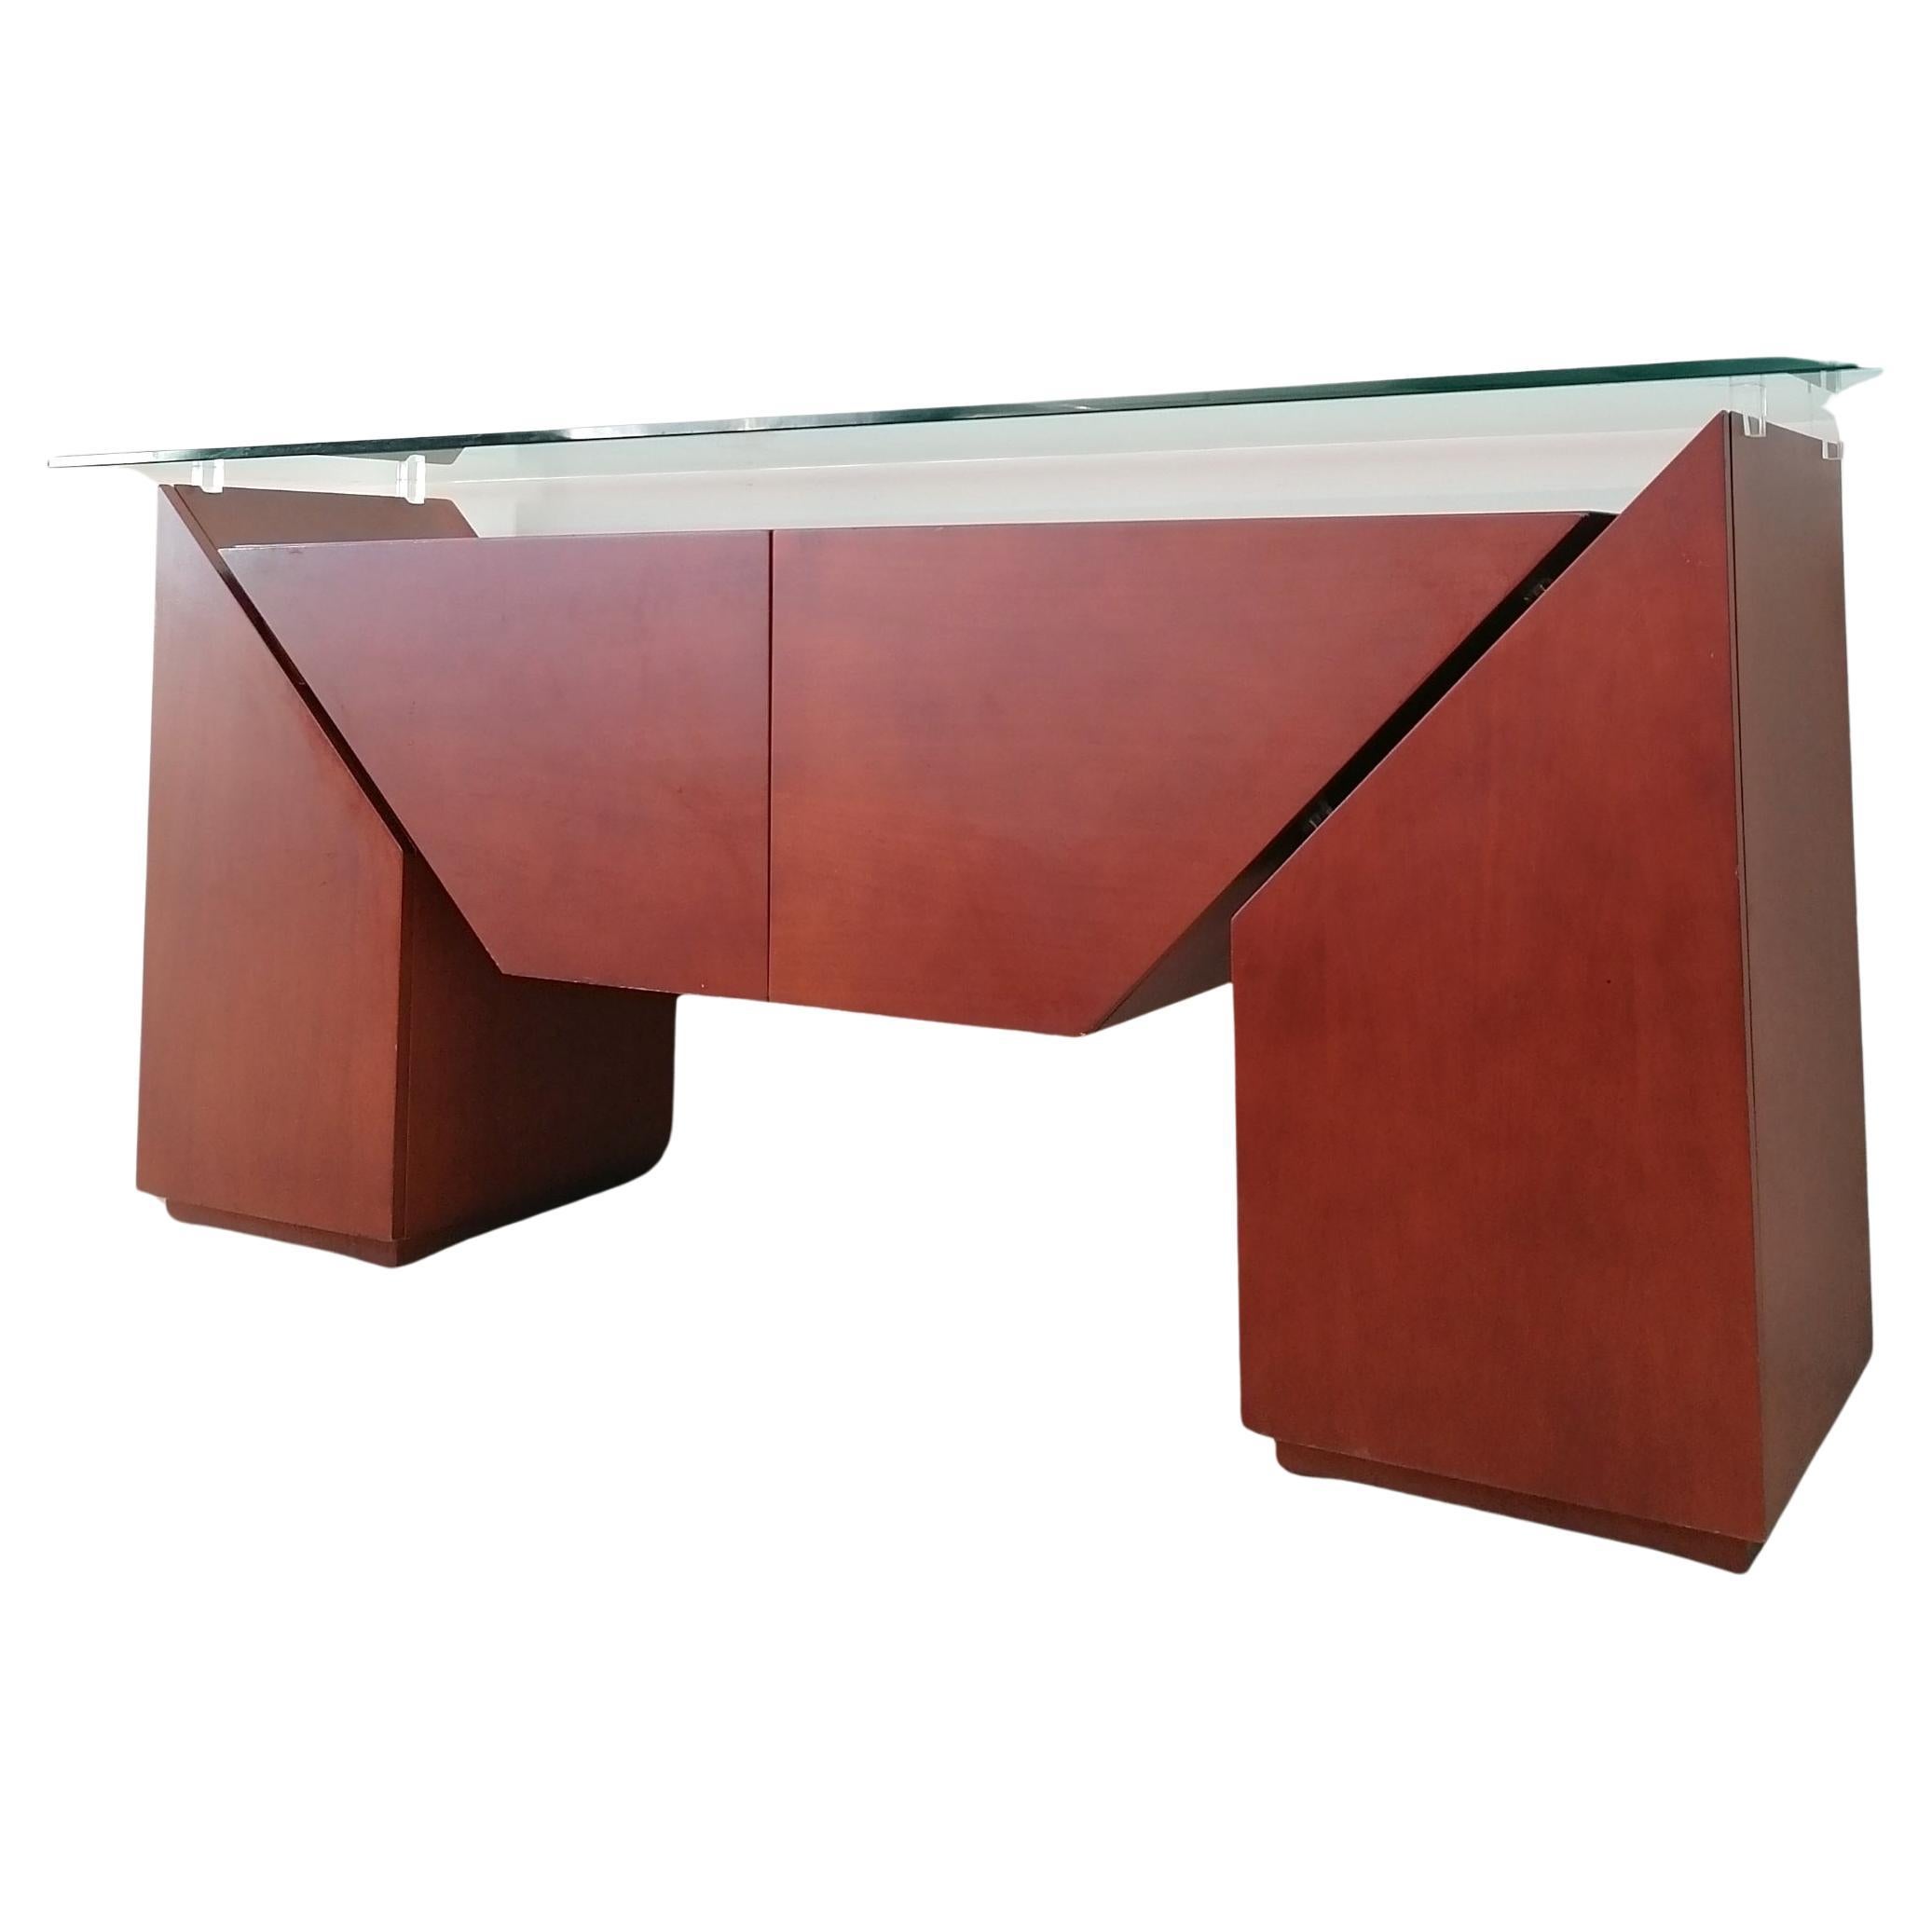 Postmodern 'Brooklyn' sideboard by Luigi Gorgoni for Roche Bobois, France 1980s.
Cherrywood veneer with a thick bevelled glass top. Lucite blocks support the top, and create gaps between the vertical and horizontal elements of the piece, giving the